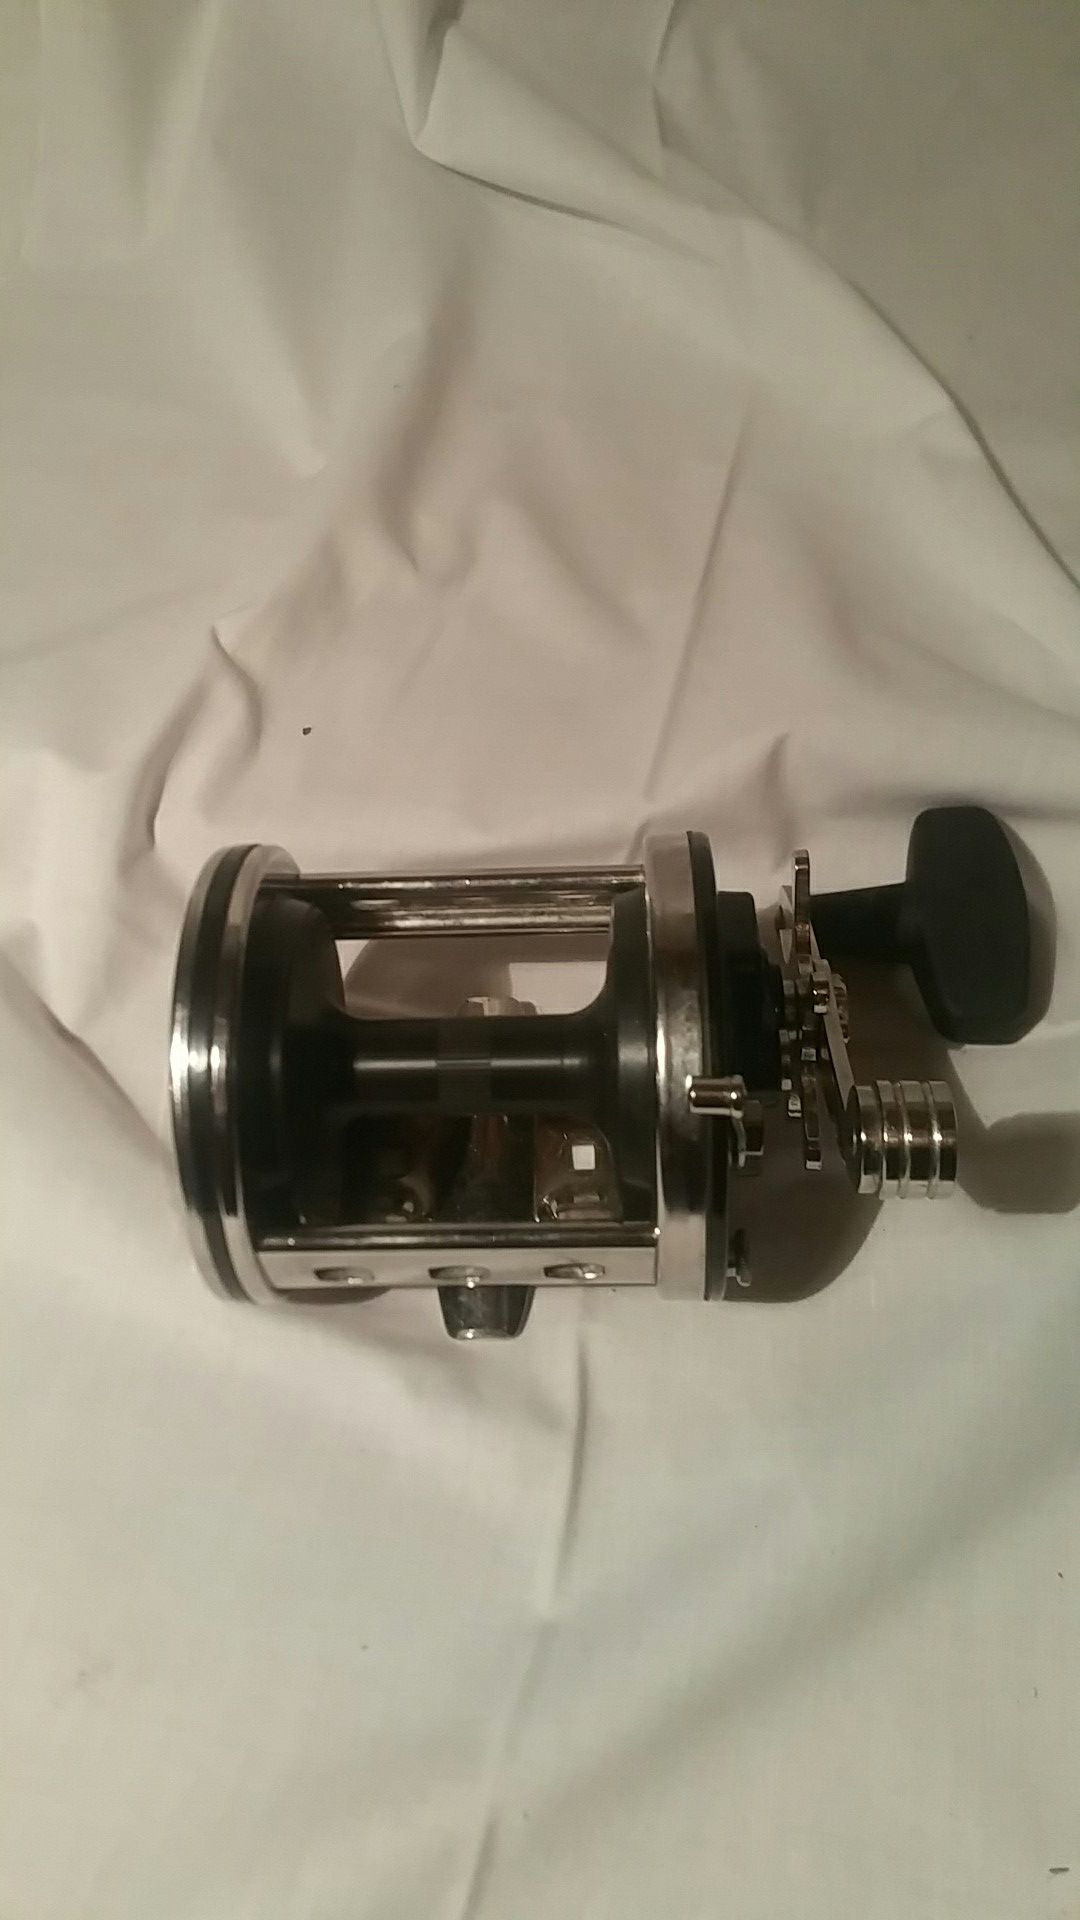 Penn 505 HS jigmaster high speed fishing reel made in the USA